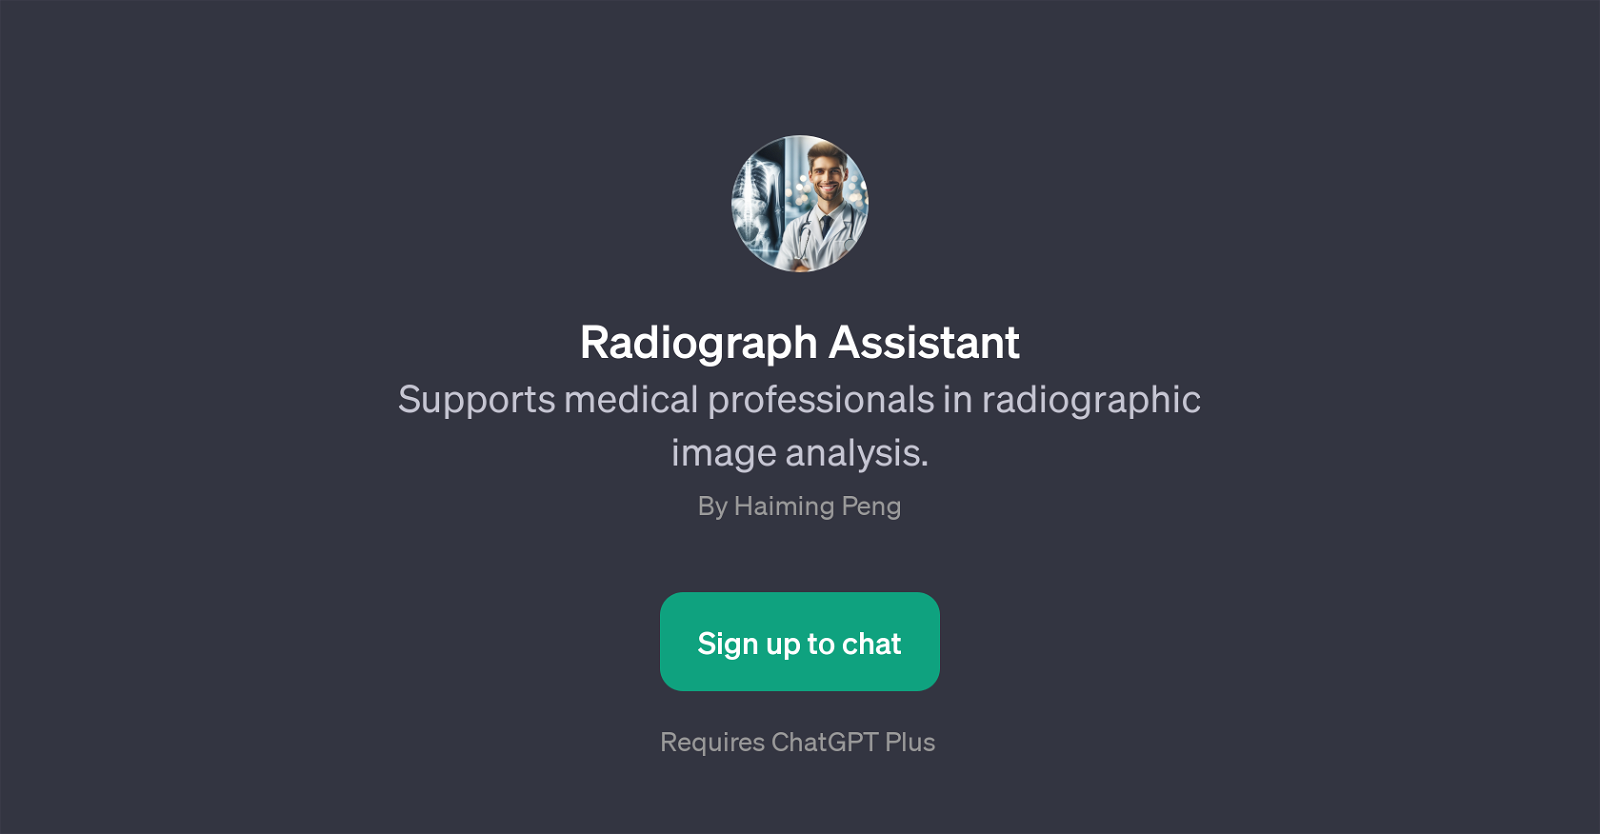 Radiograph Assistant website